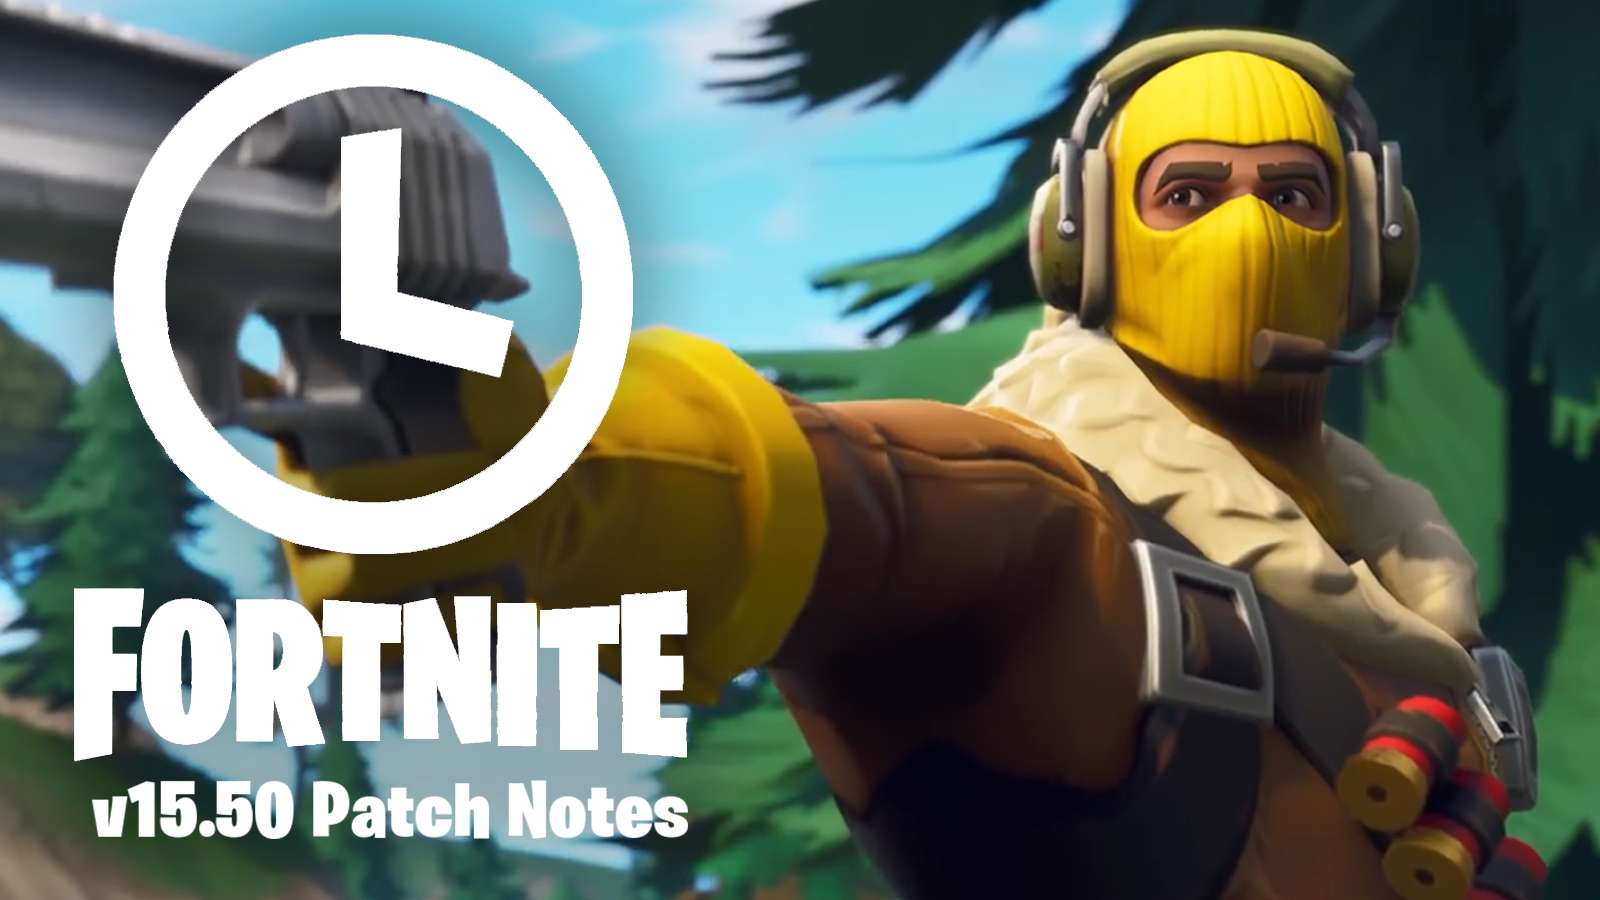 Fortnite update 15.50 early patch notes.